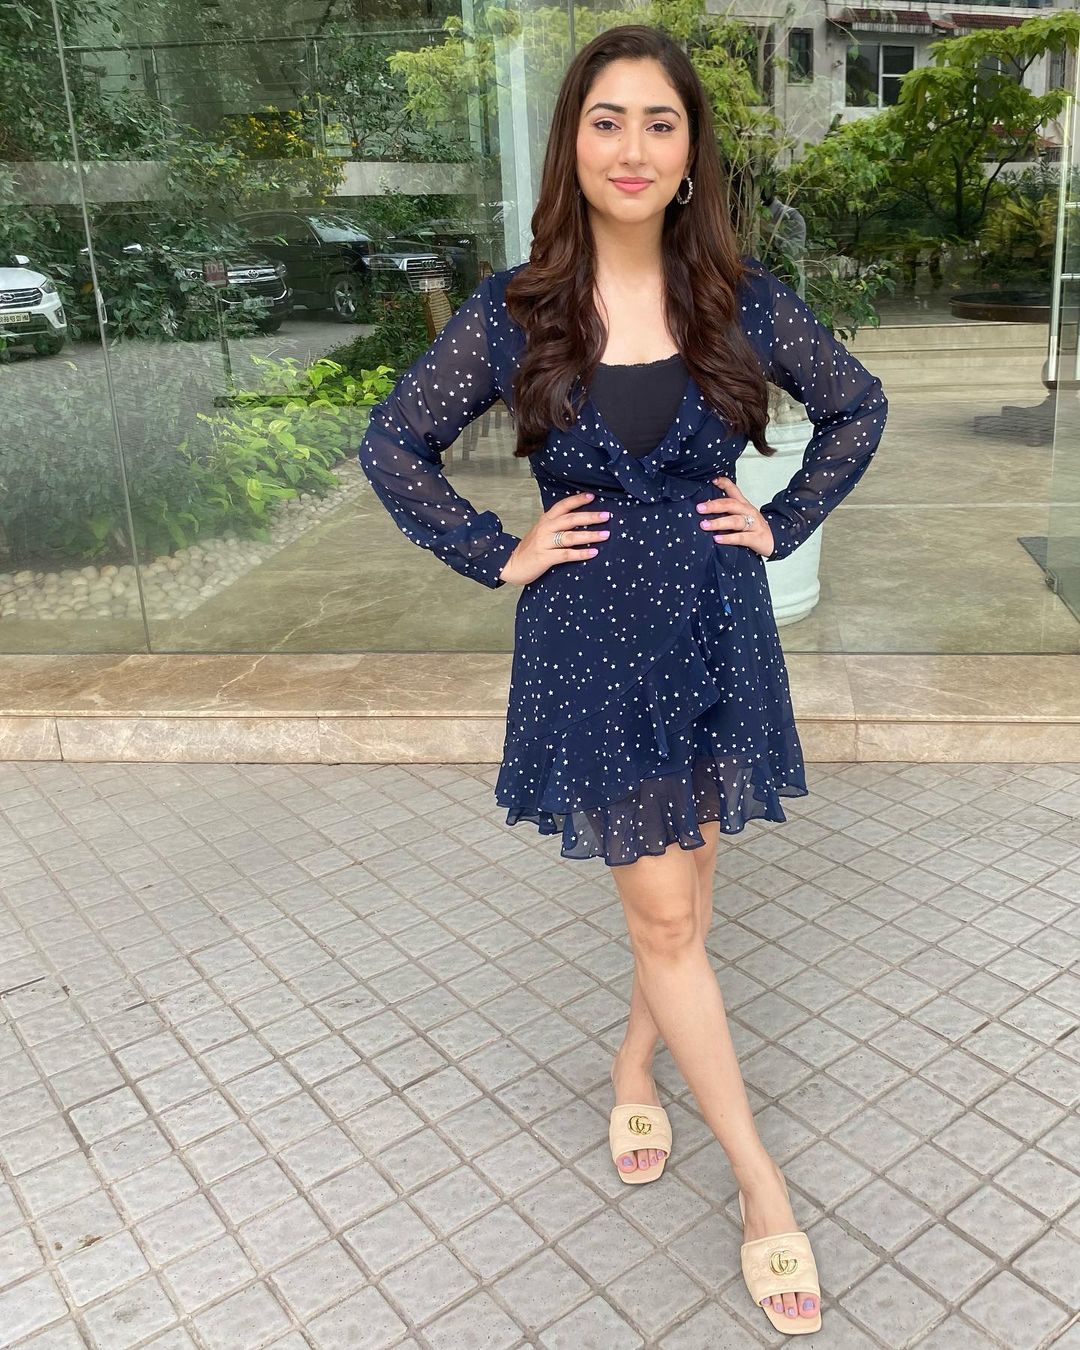 Disha Parmar Girly Look In Blue Mini Dress Outfit Disha Parmar Amazing Outfit And Looks